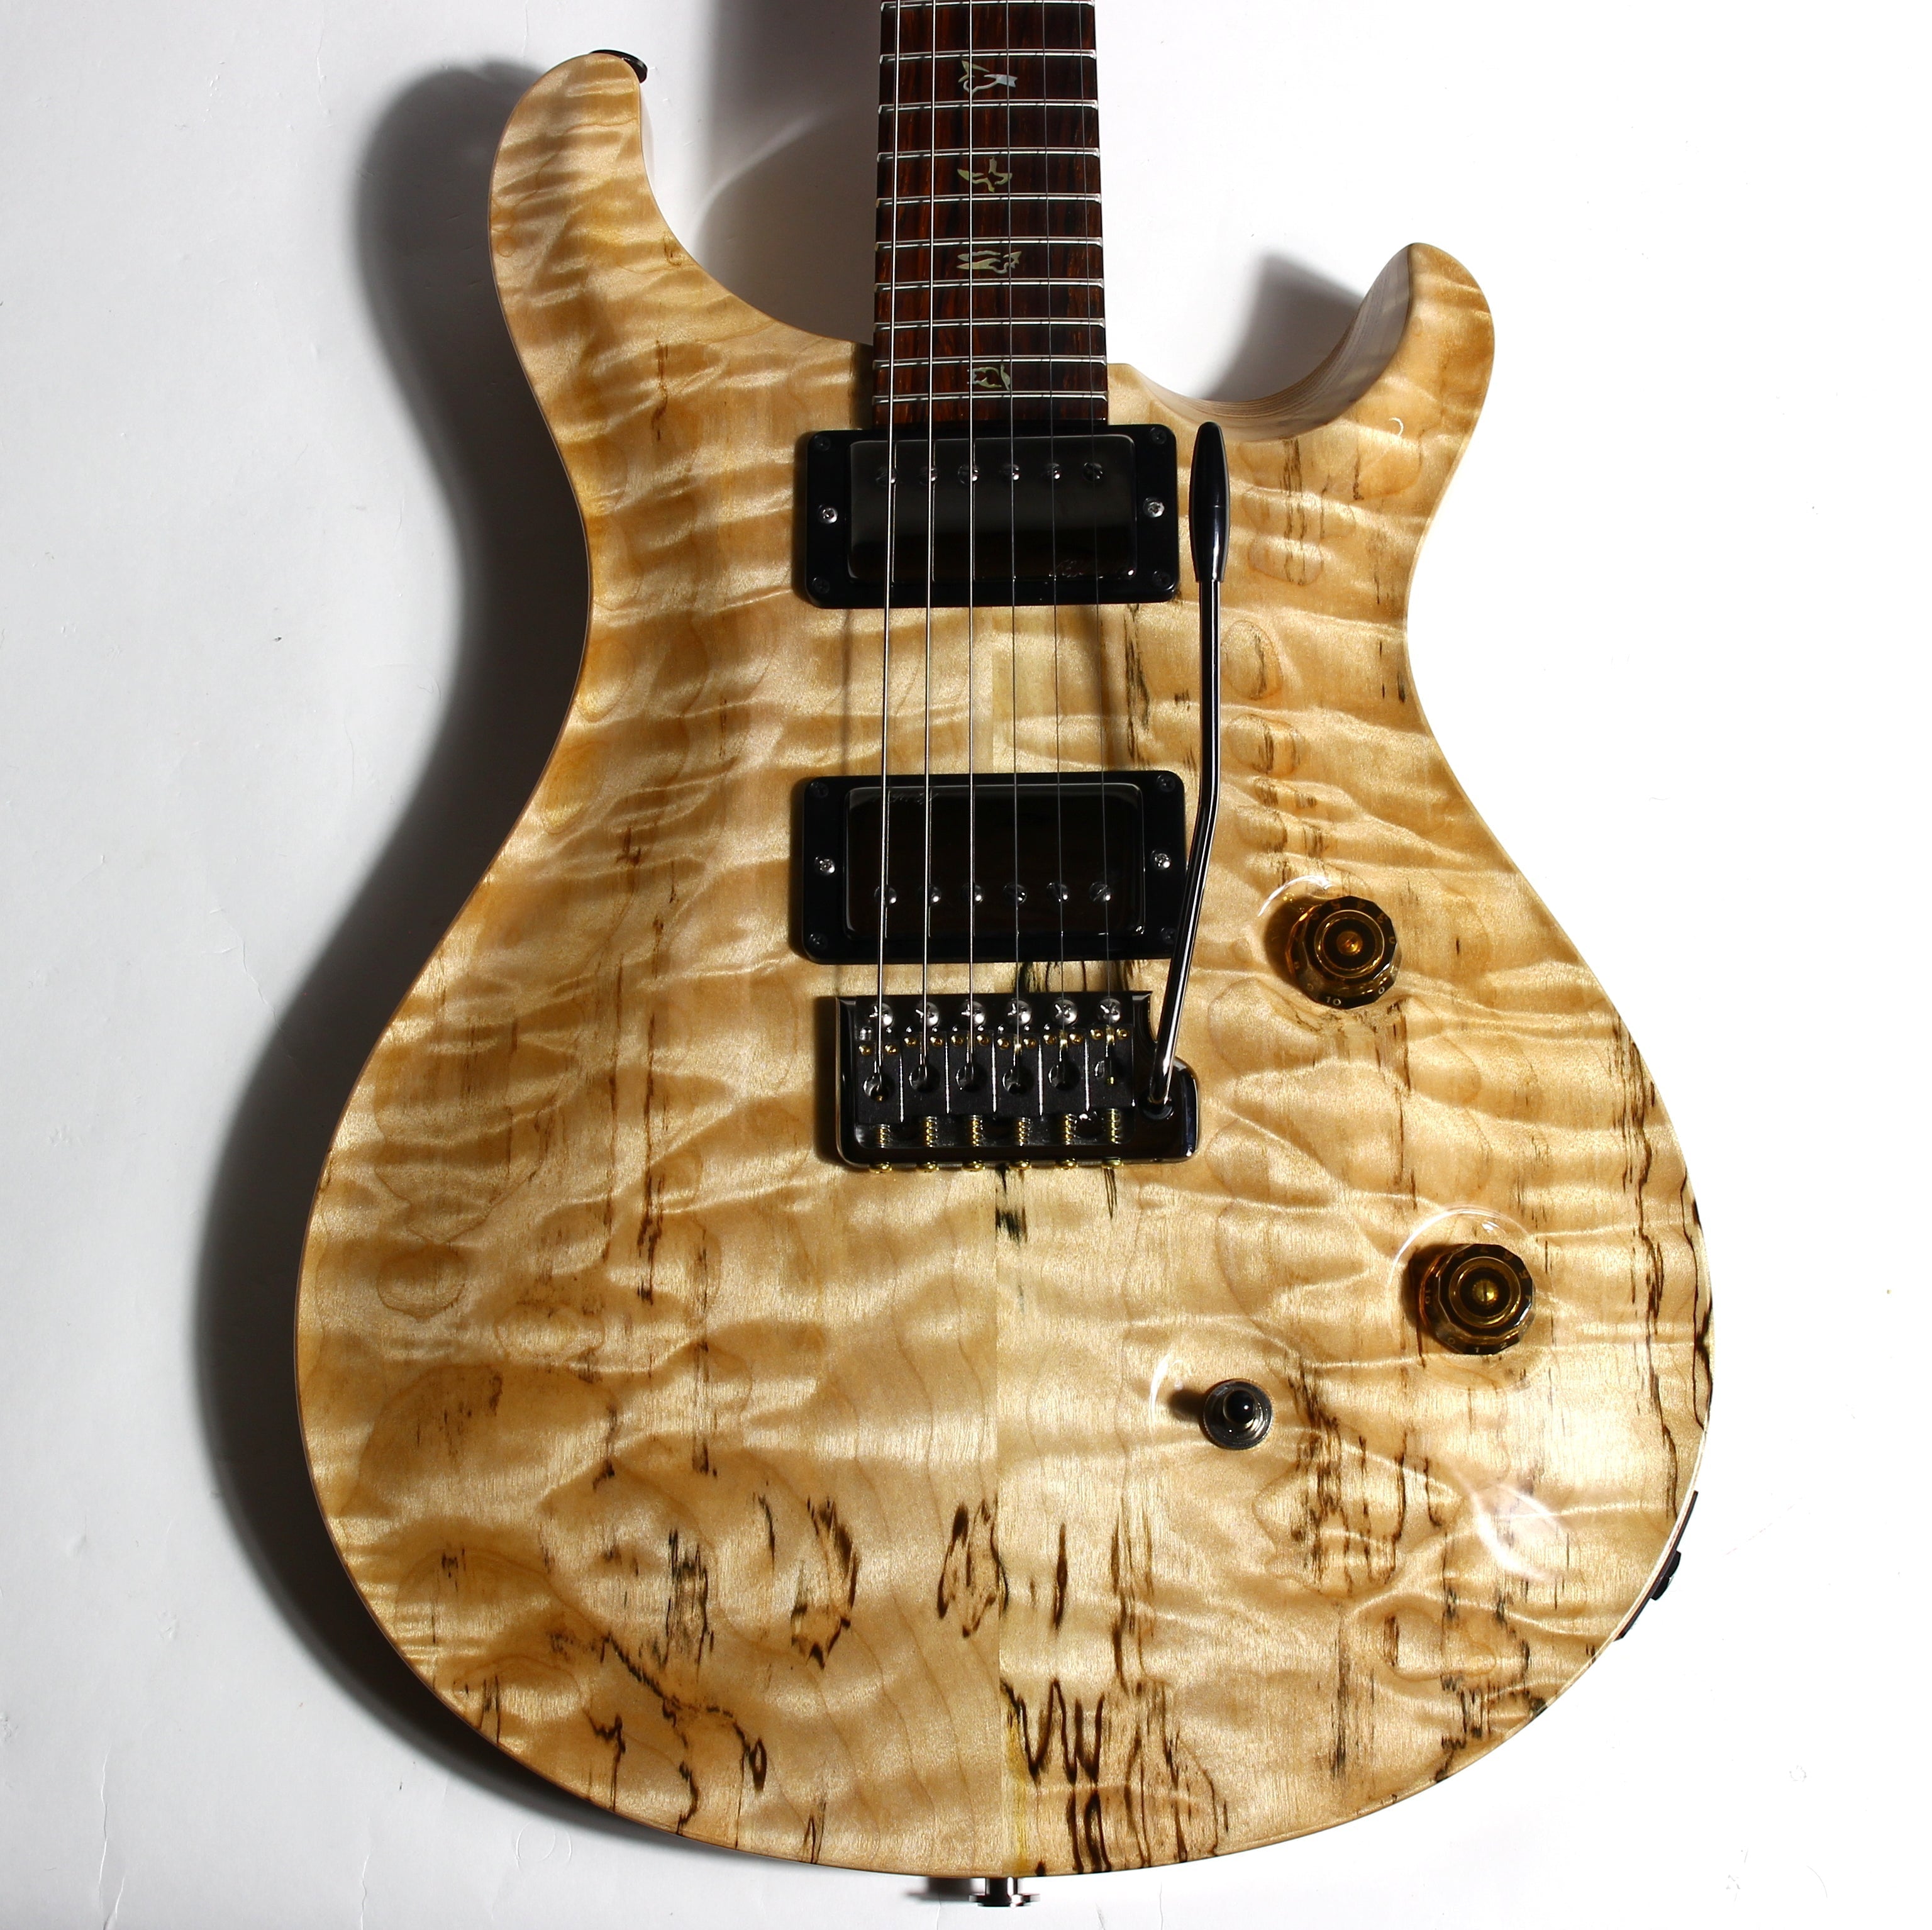 *SOLD*  2021 PRS Wood Library Custom 24 QUILT 10 TOP Torrefied Maple Neck Natural Paul Reed Smith